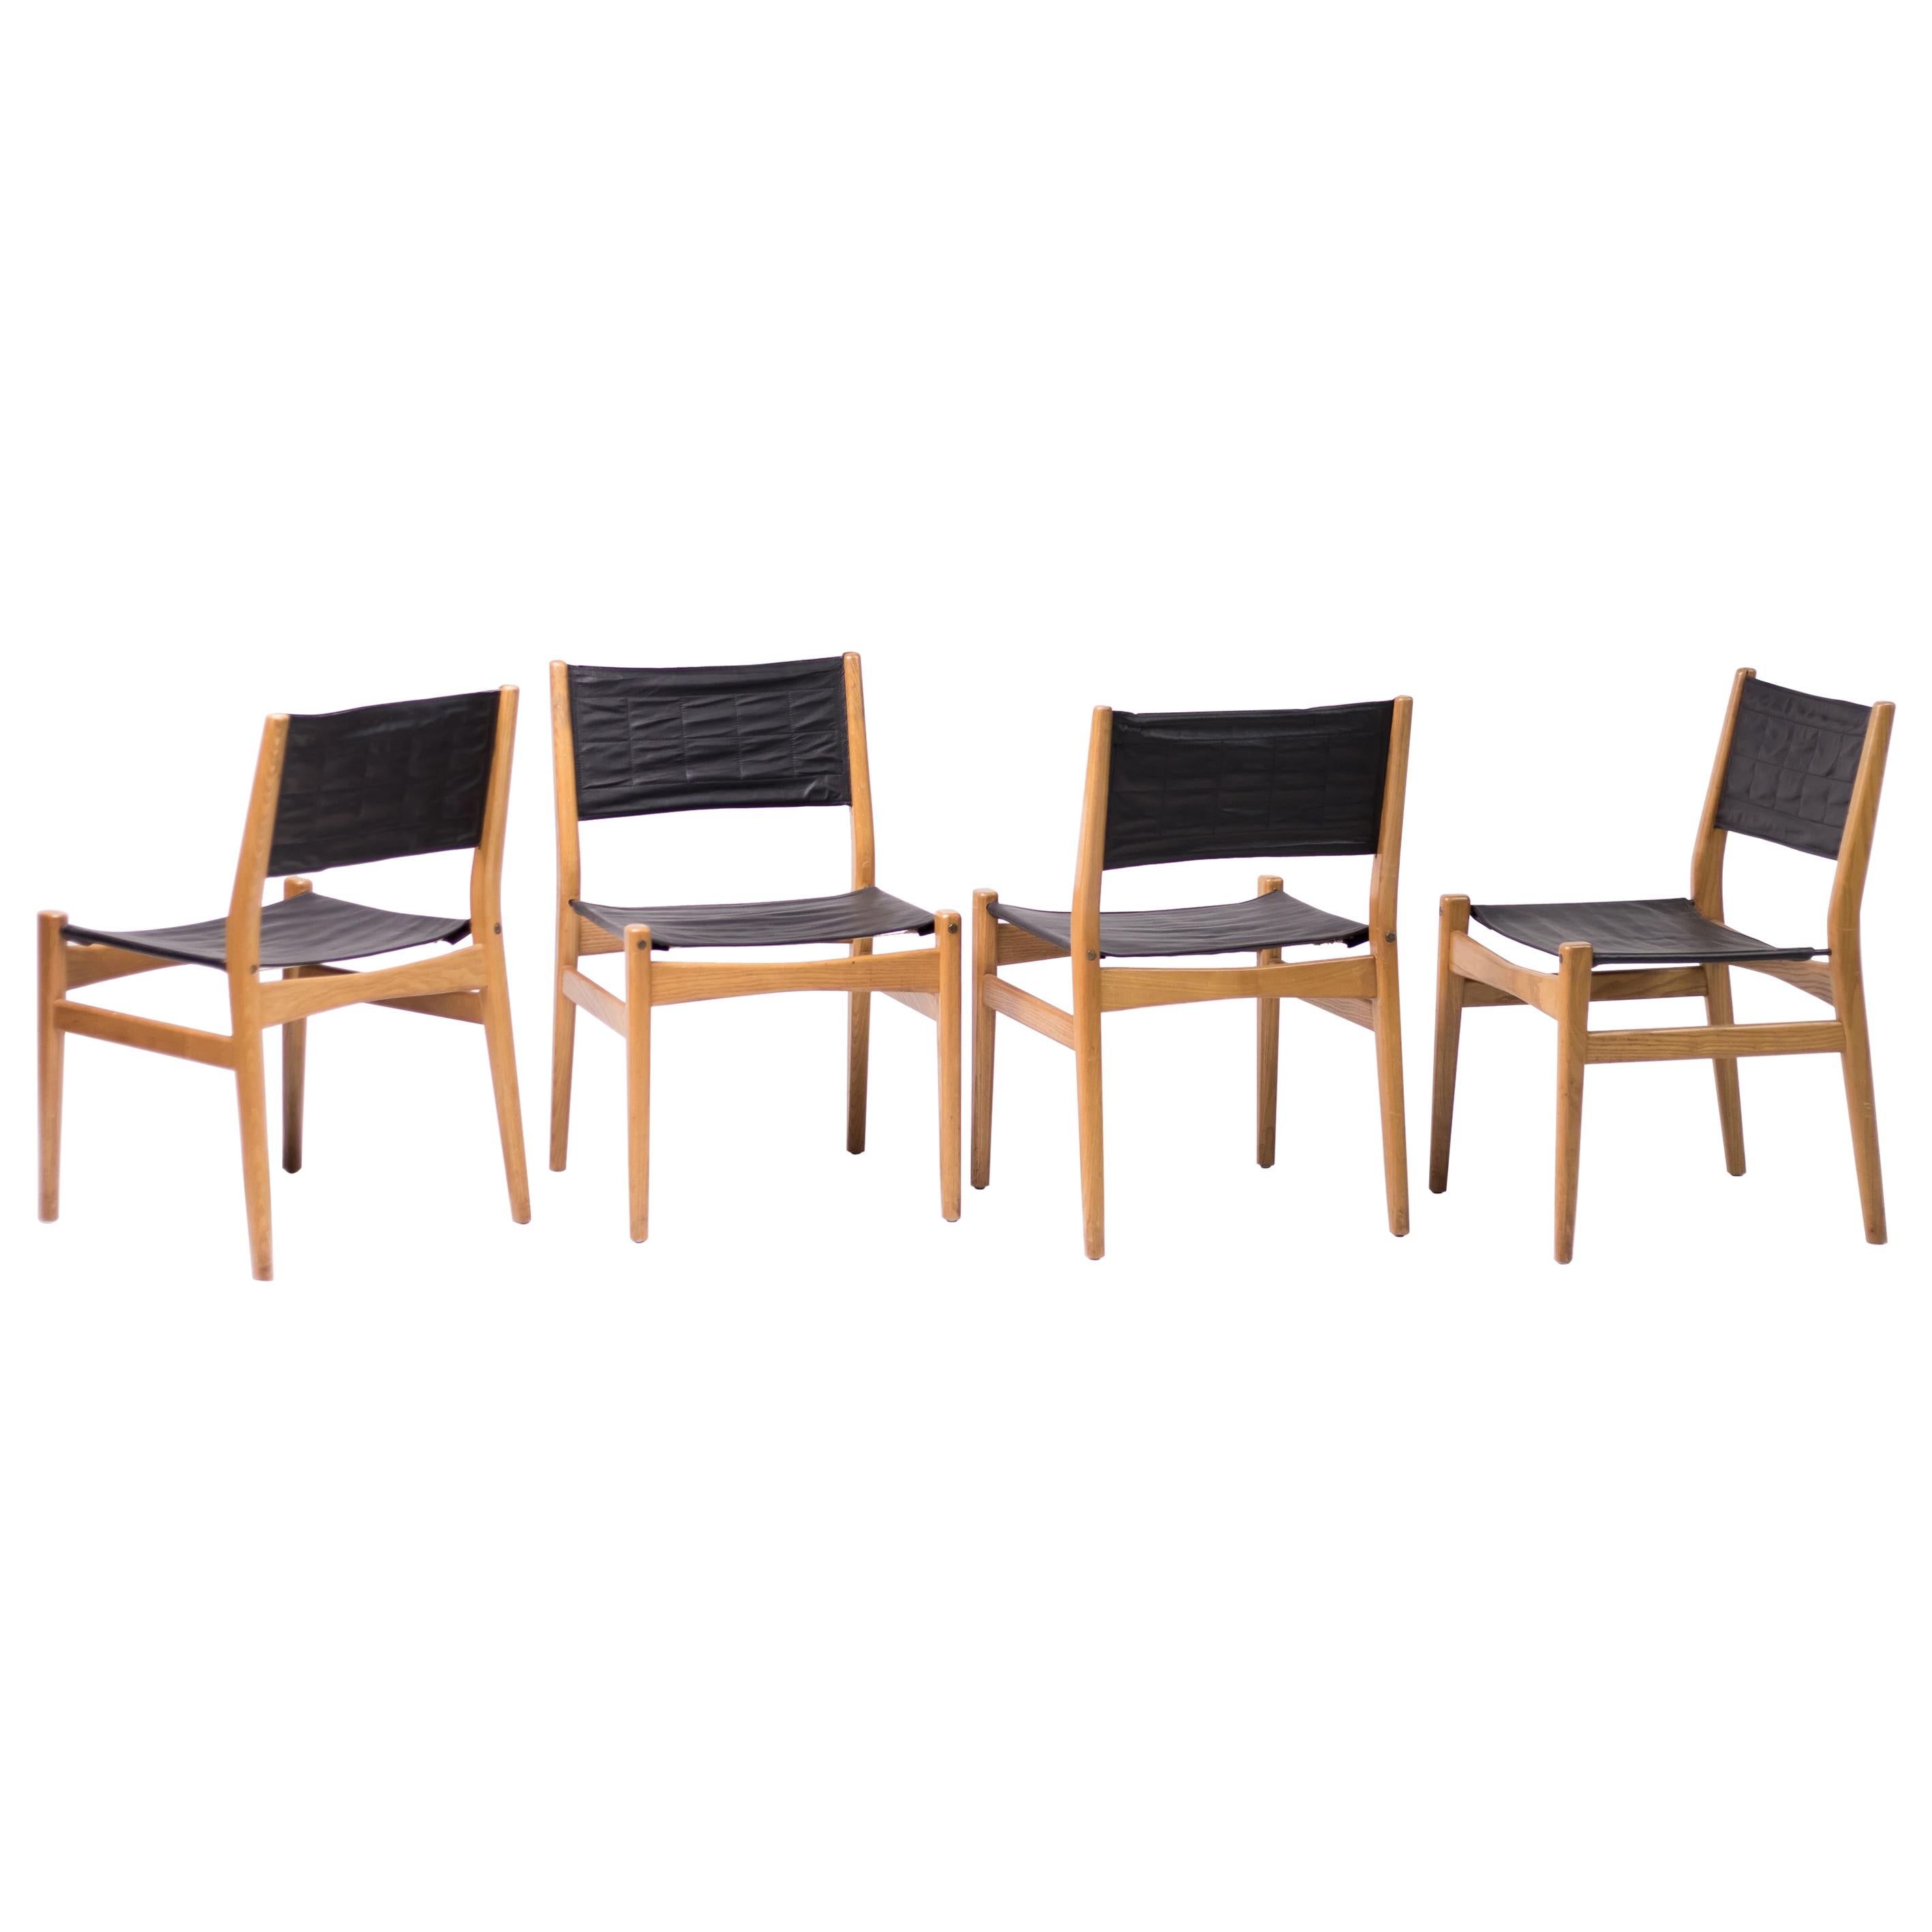 Set of Scandinavian Leather Sling Seat Dining Chairs